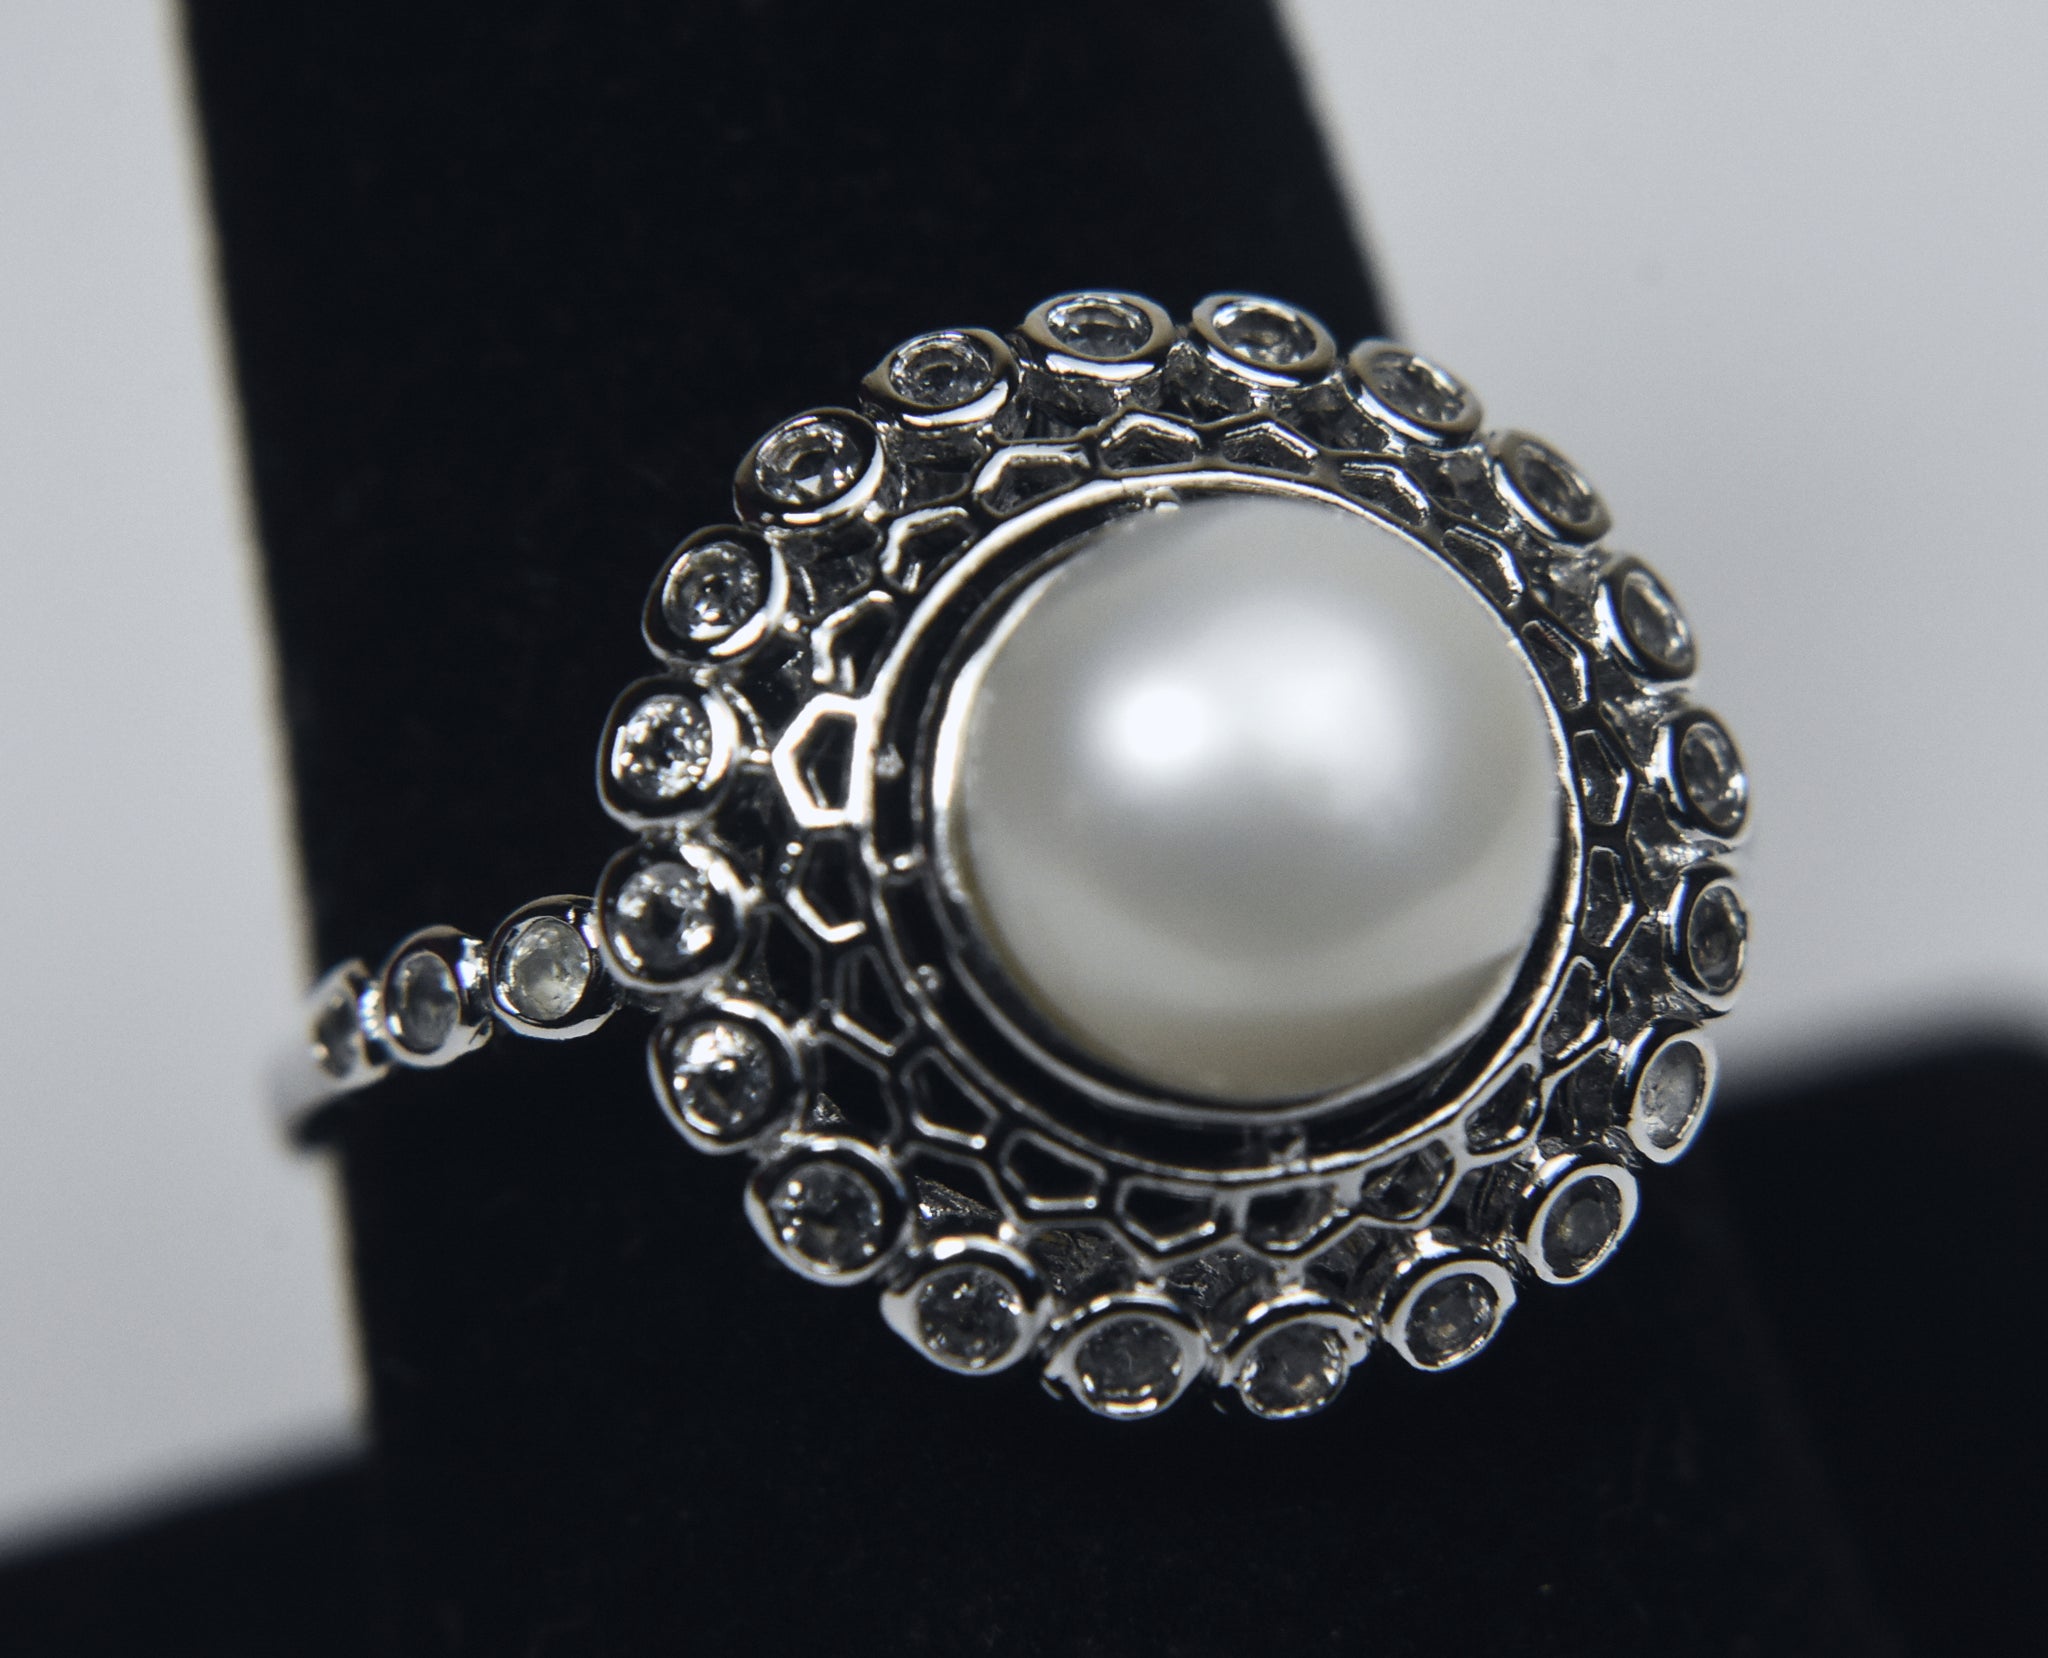 Pearl and Topaz Sterling Silver Ring - Size 9